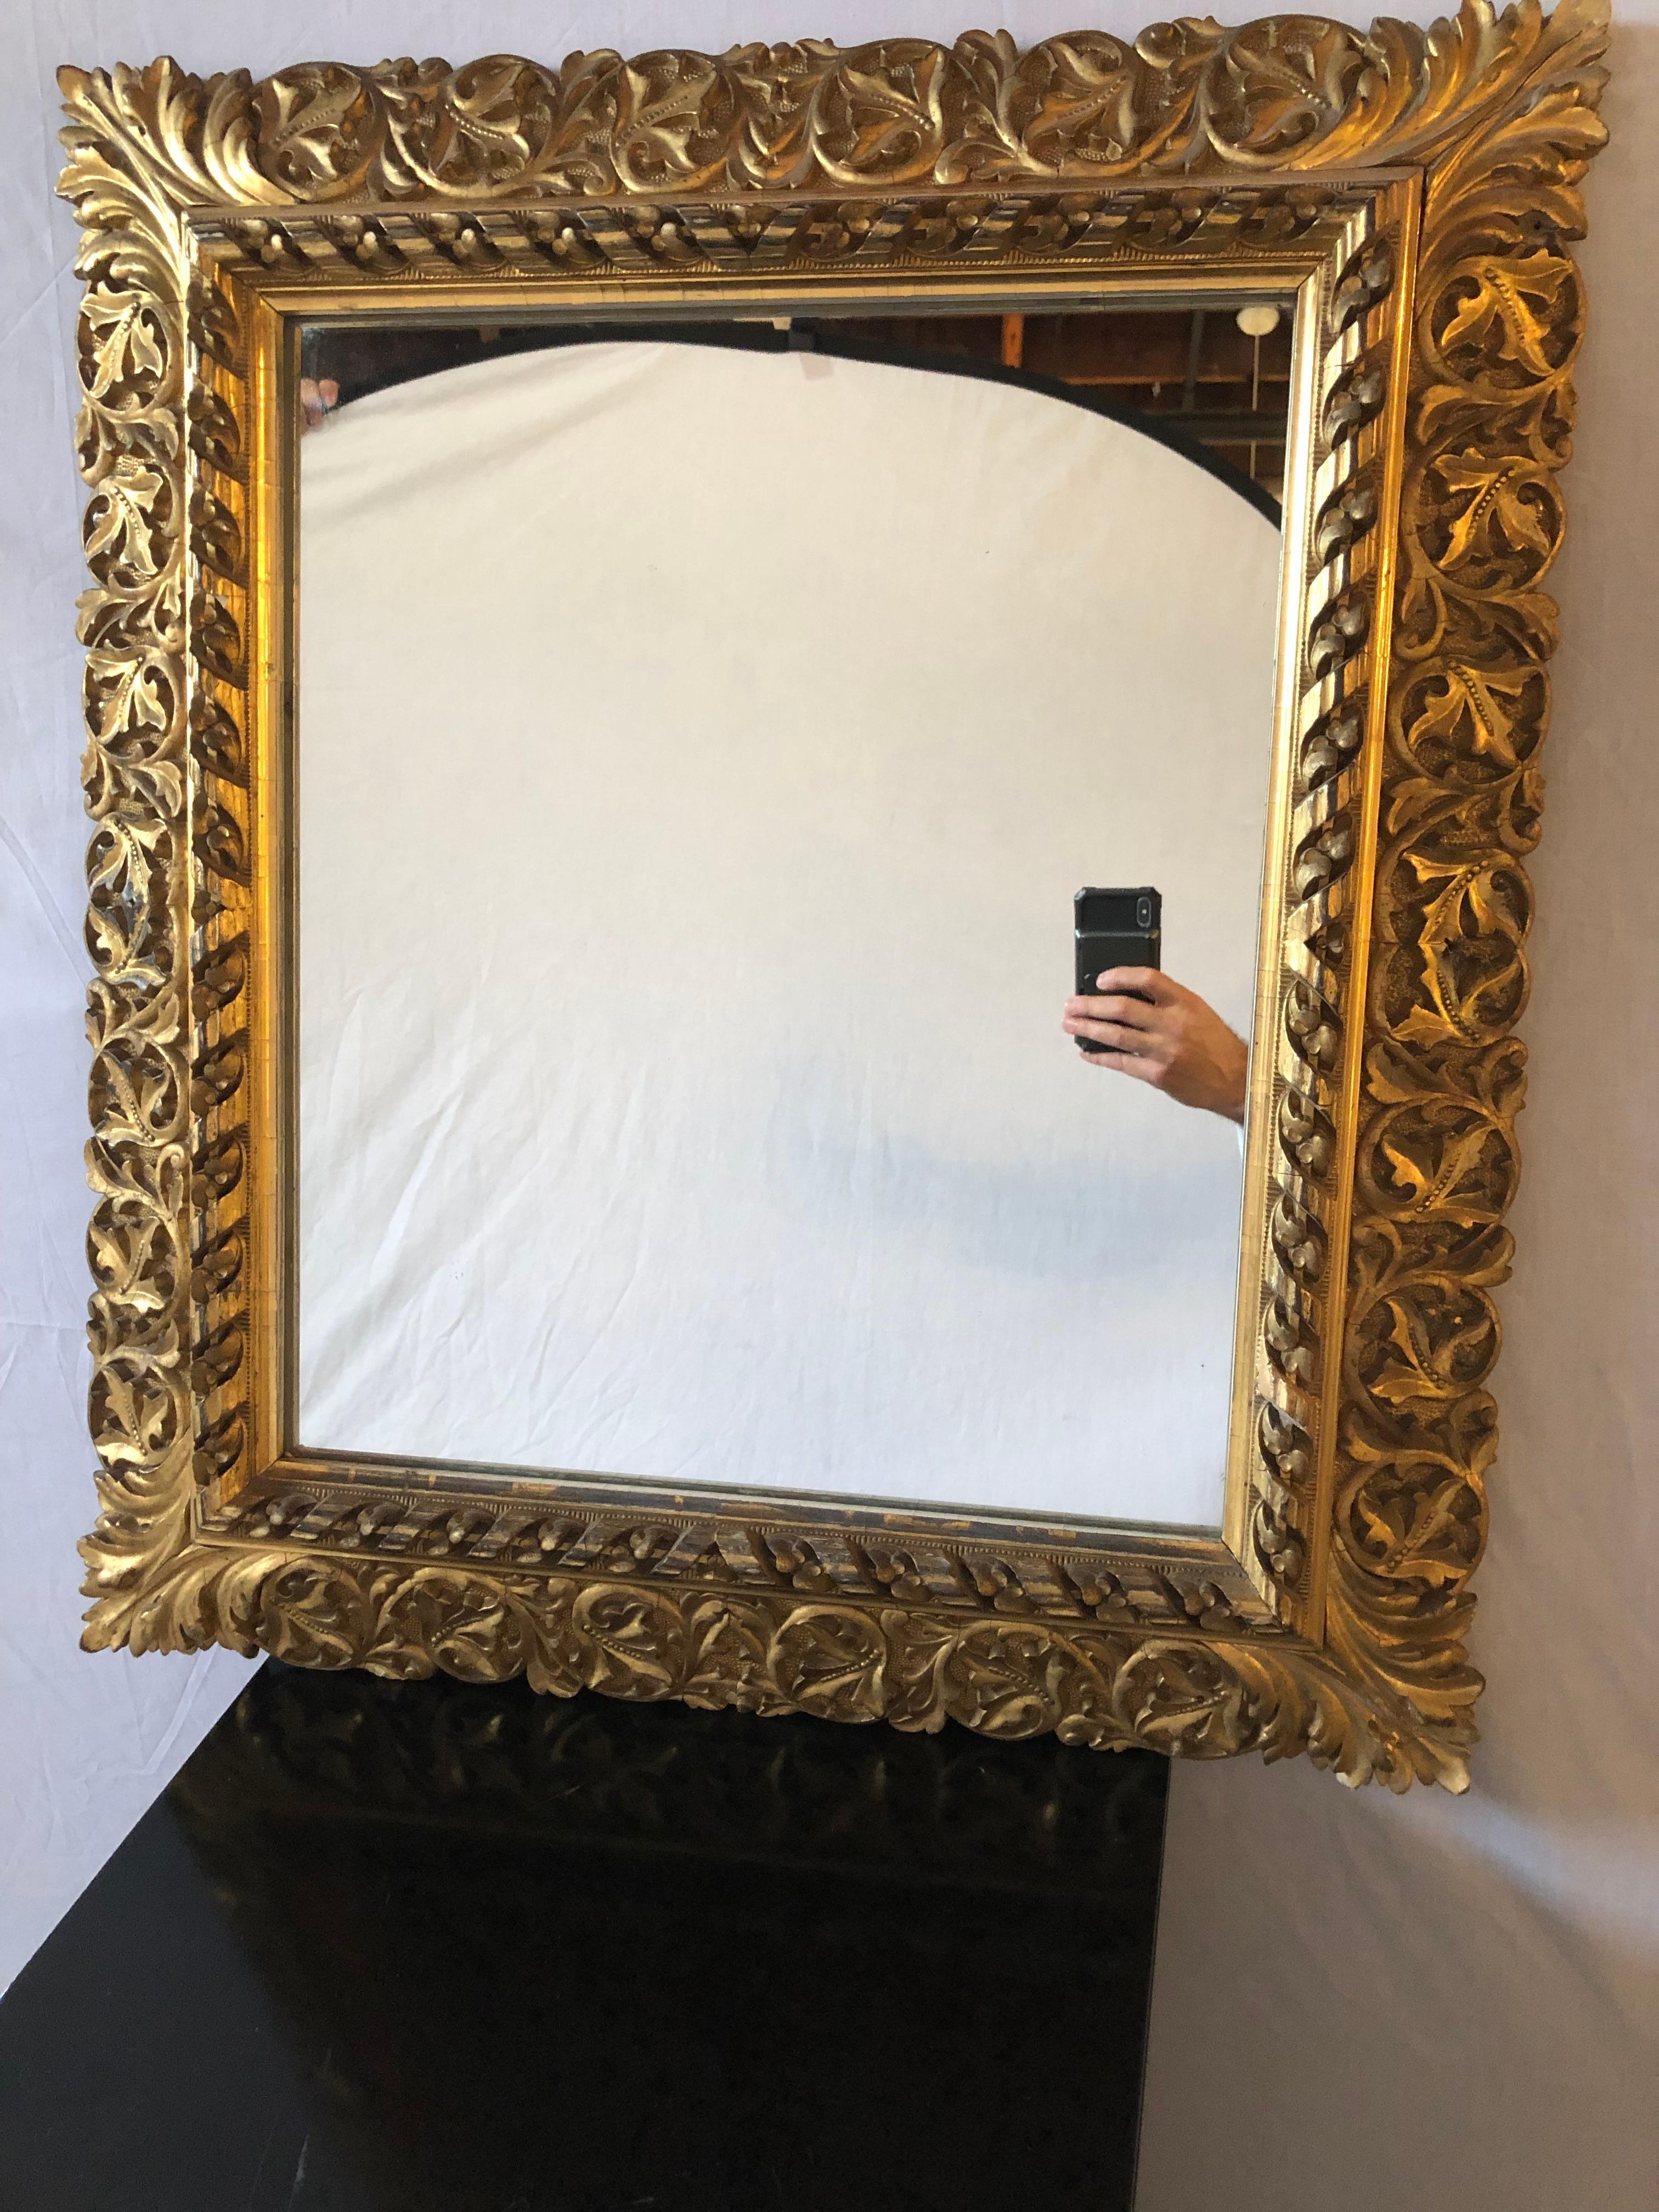 Antique 19th century fine giltwood wall / console or pier mirror with leaf vine and floral carvings. This finely gilt mirror is squarish in size and simply stunning in both quality and design.